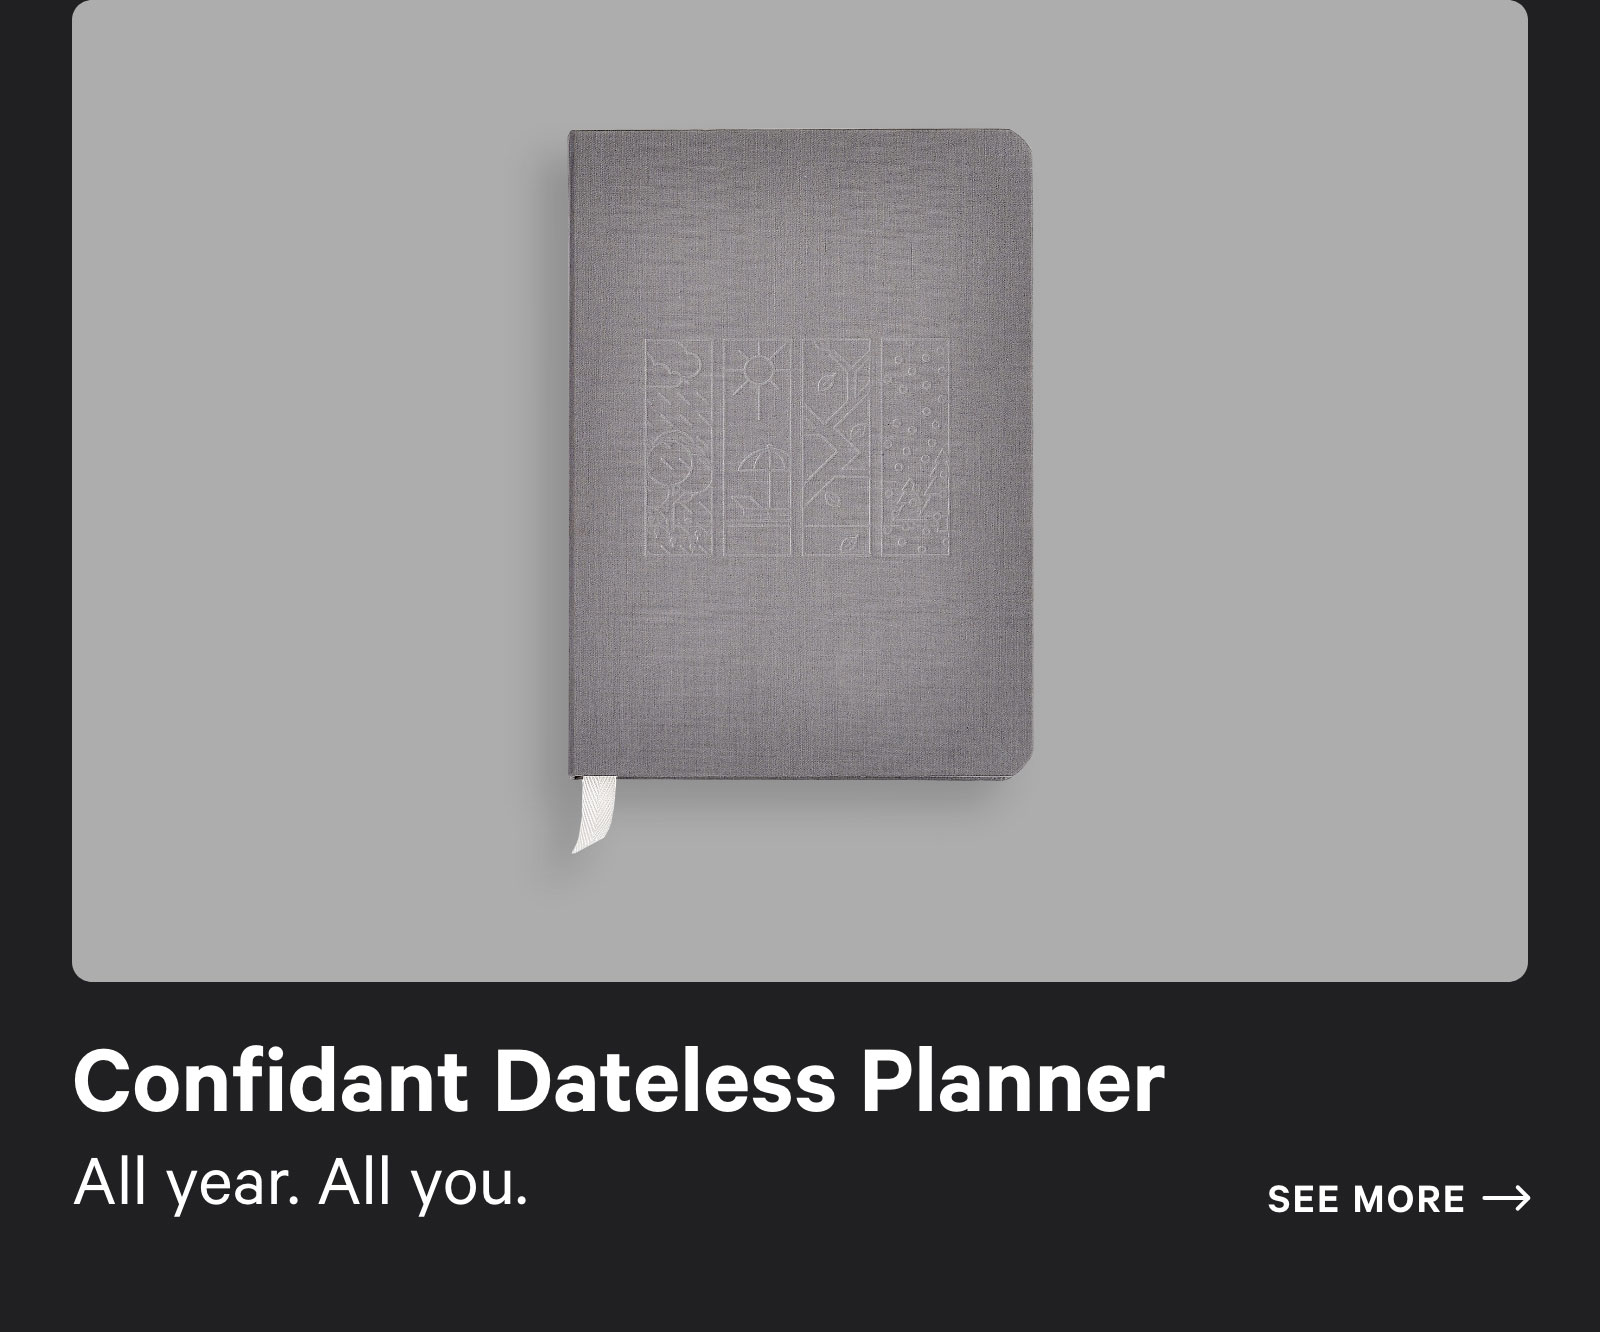 Confidant Dateless Planner. All year. All you. See more ?